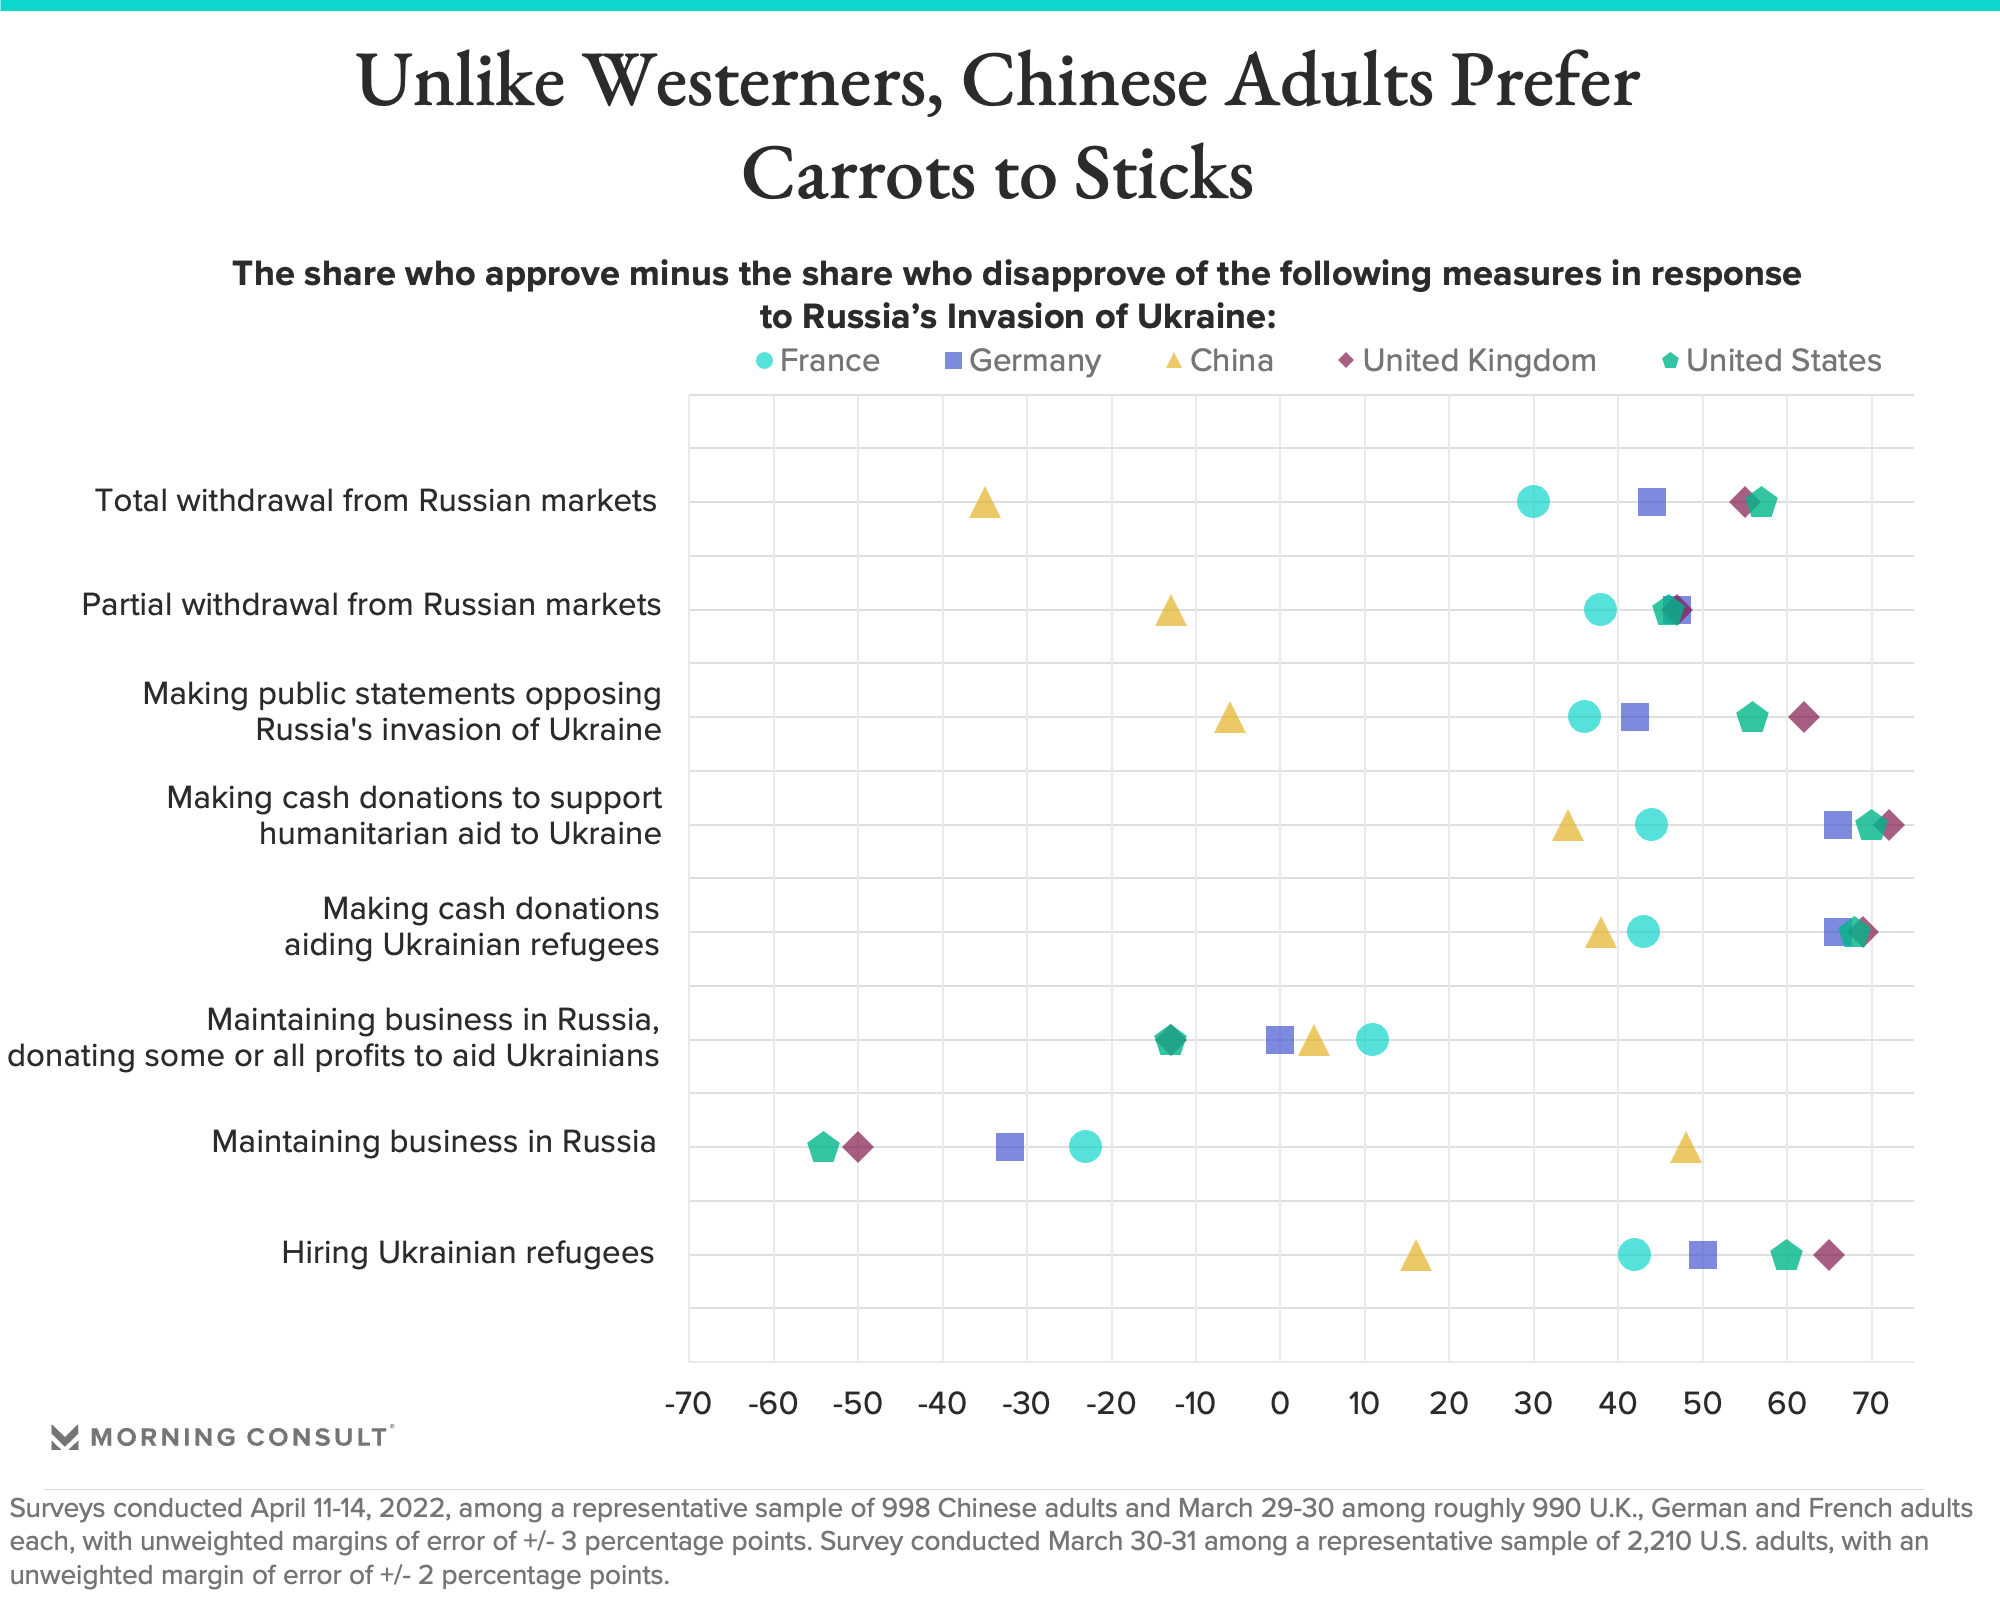 Dot plot showing that Chinese adults prefer corporate activism in the form of incentives rather than penalties